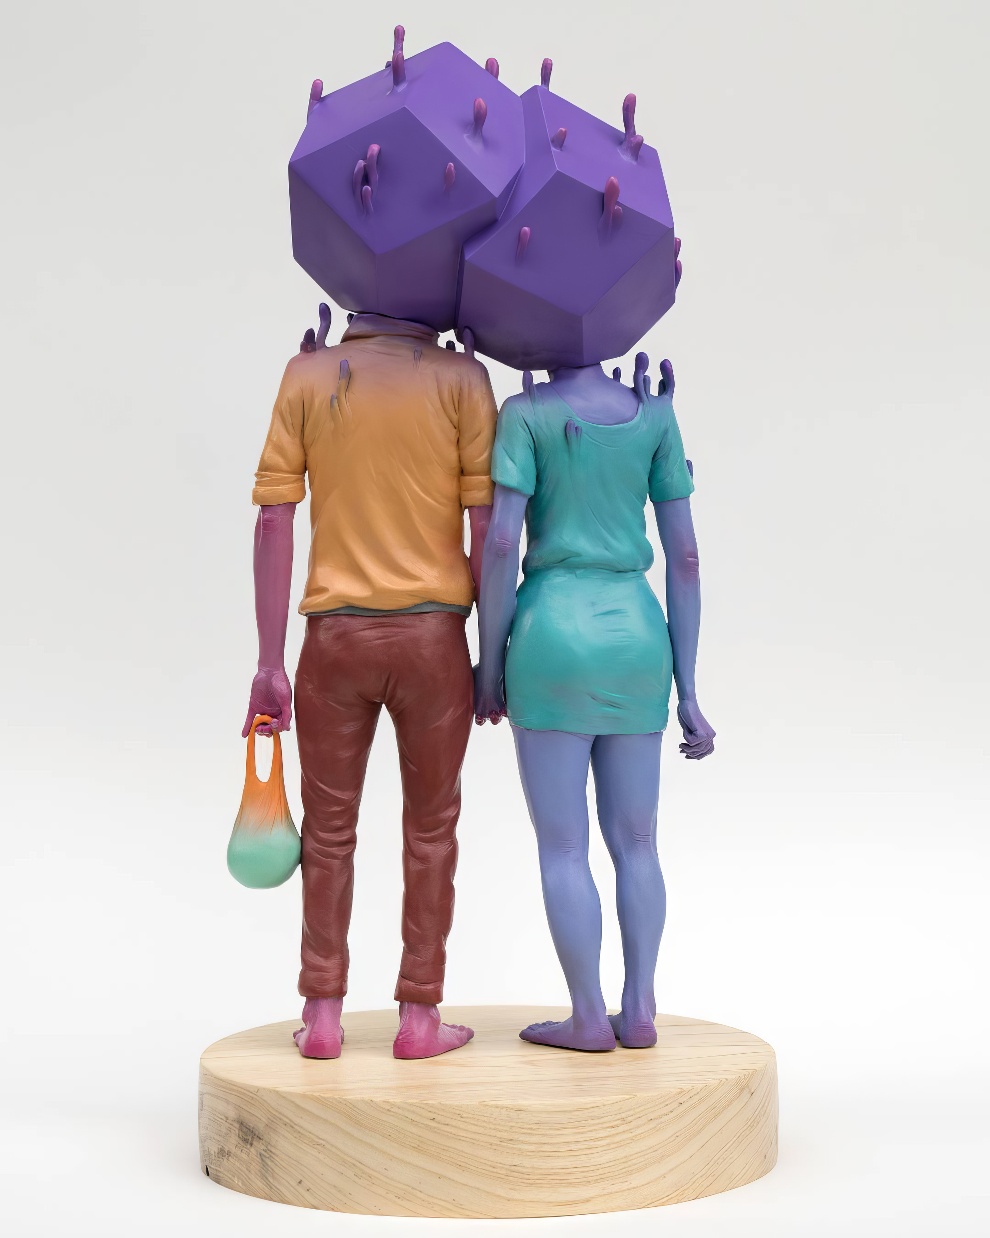 Vibrant And Thought Provoking Cartoon Like Sculptures By Troy Coulterman (16)